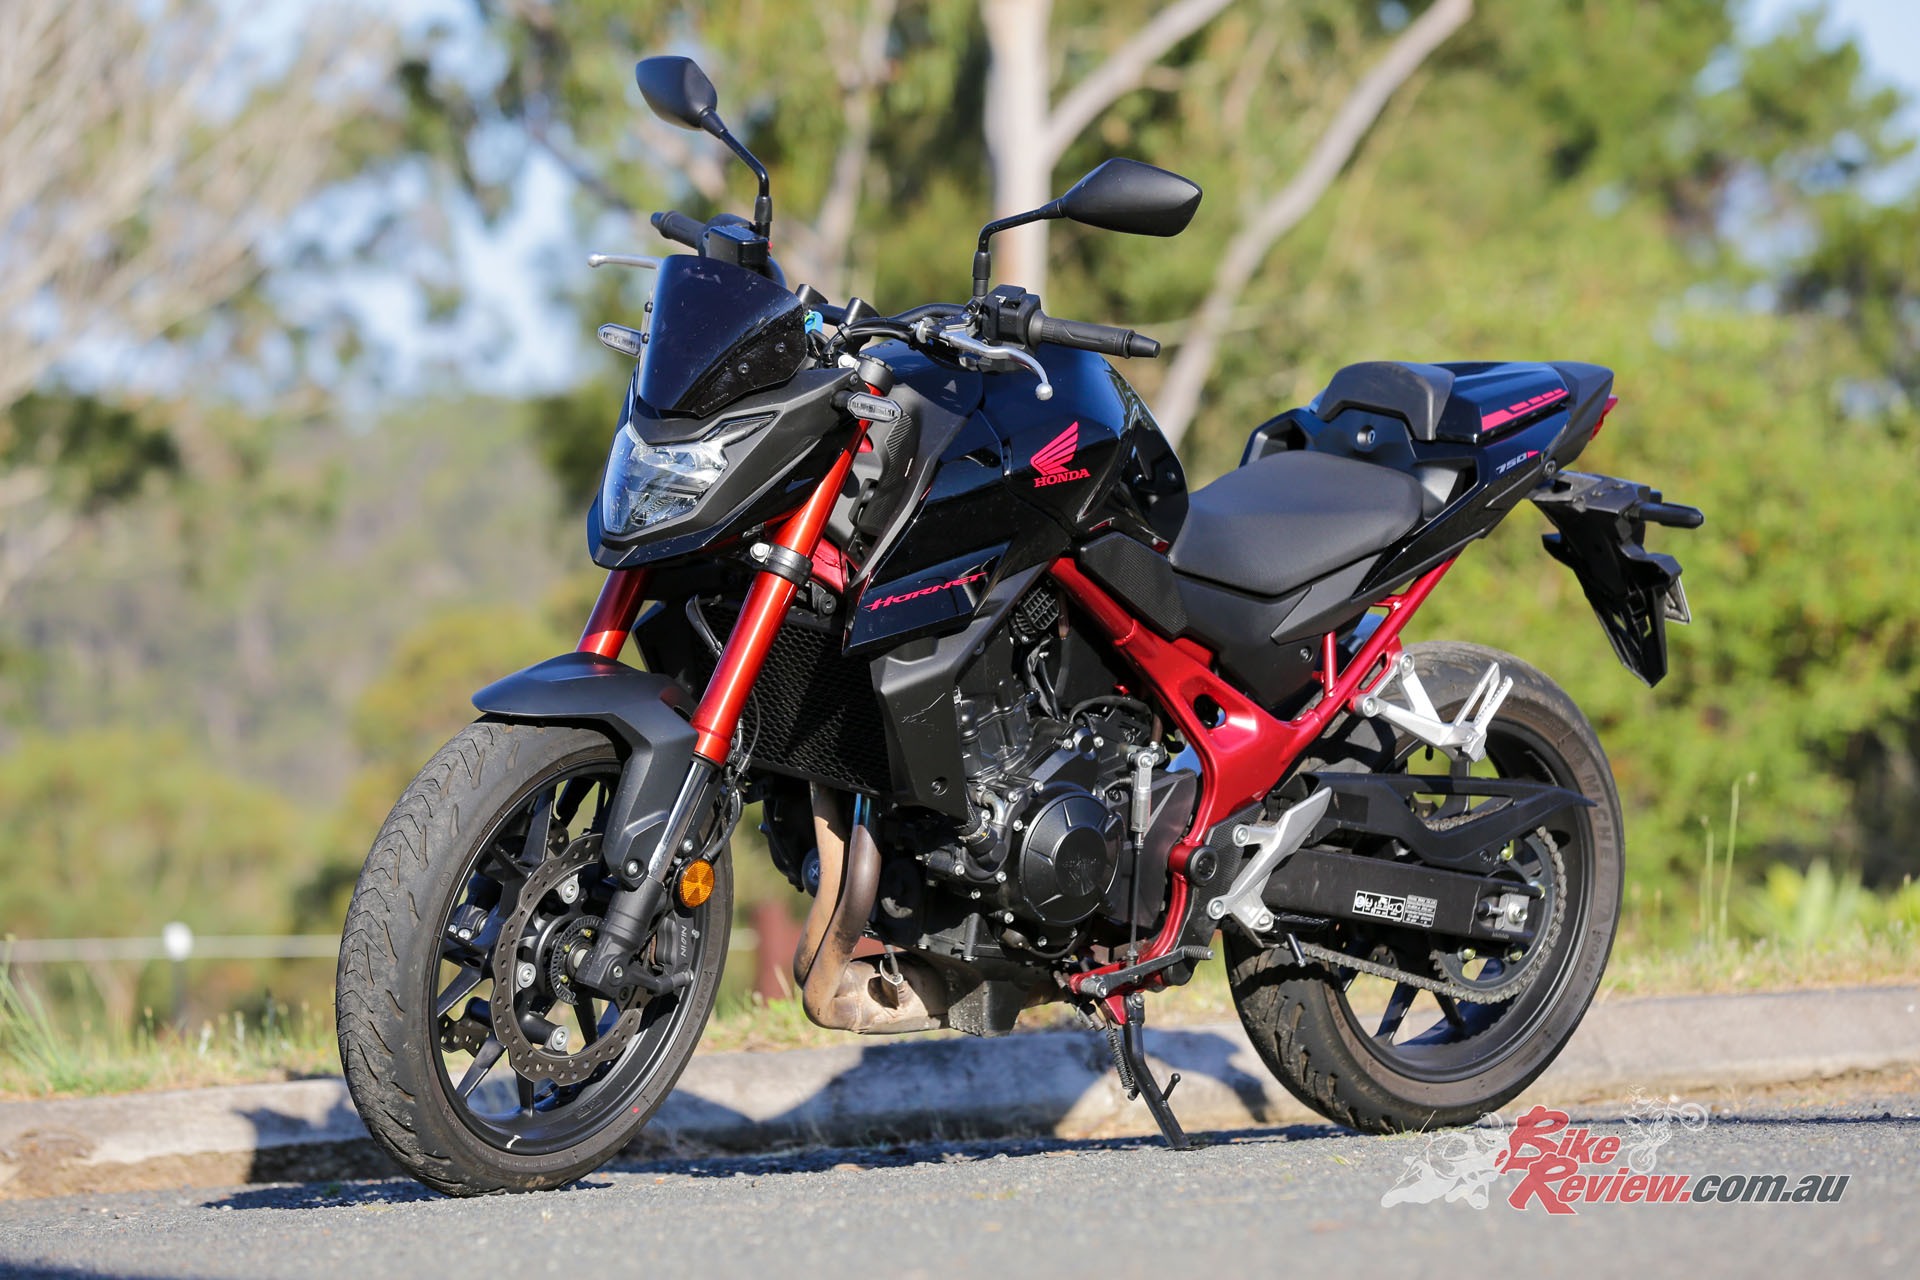 Nick has been out on the new parallel-twin Honda CB750 Hornet! Check out his thoughts.